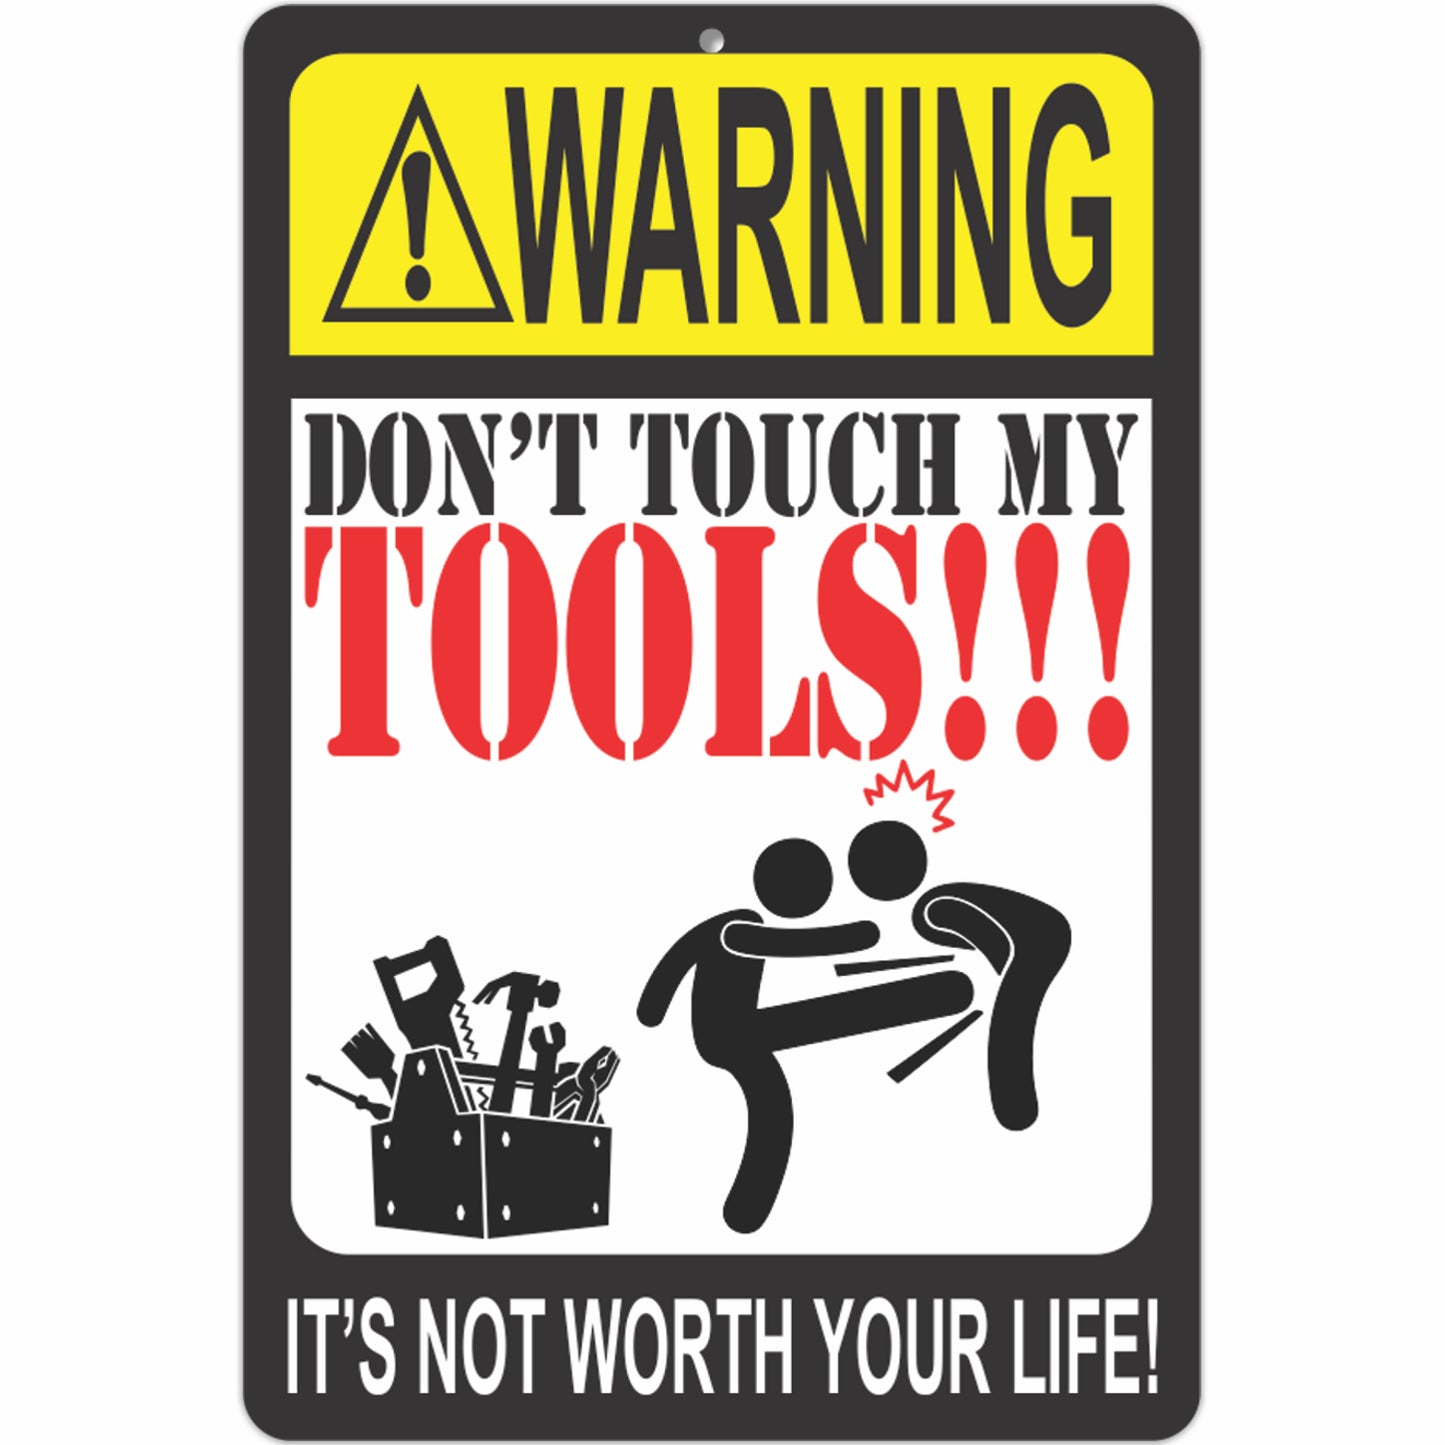 Warning Don't Touch My Tools!!! It's not Worth Your Life!